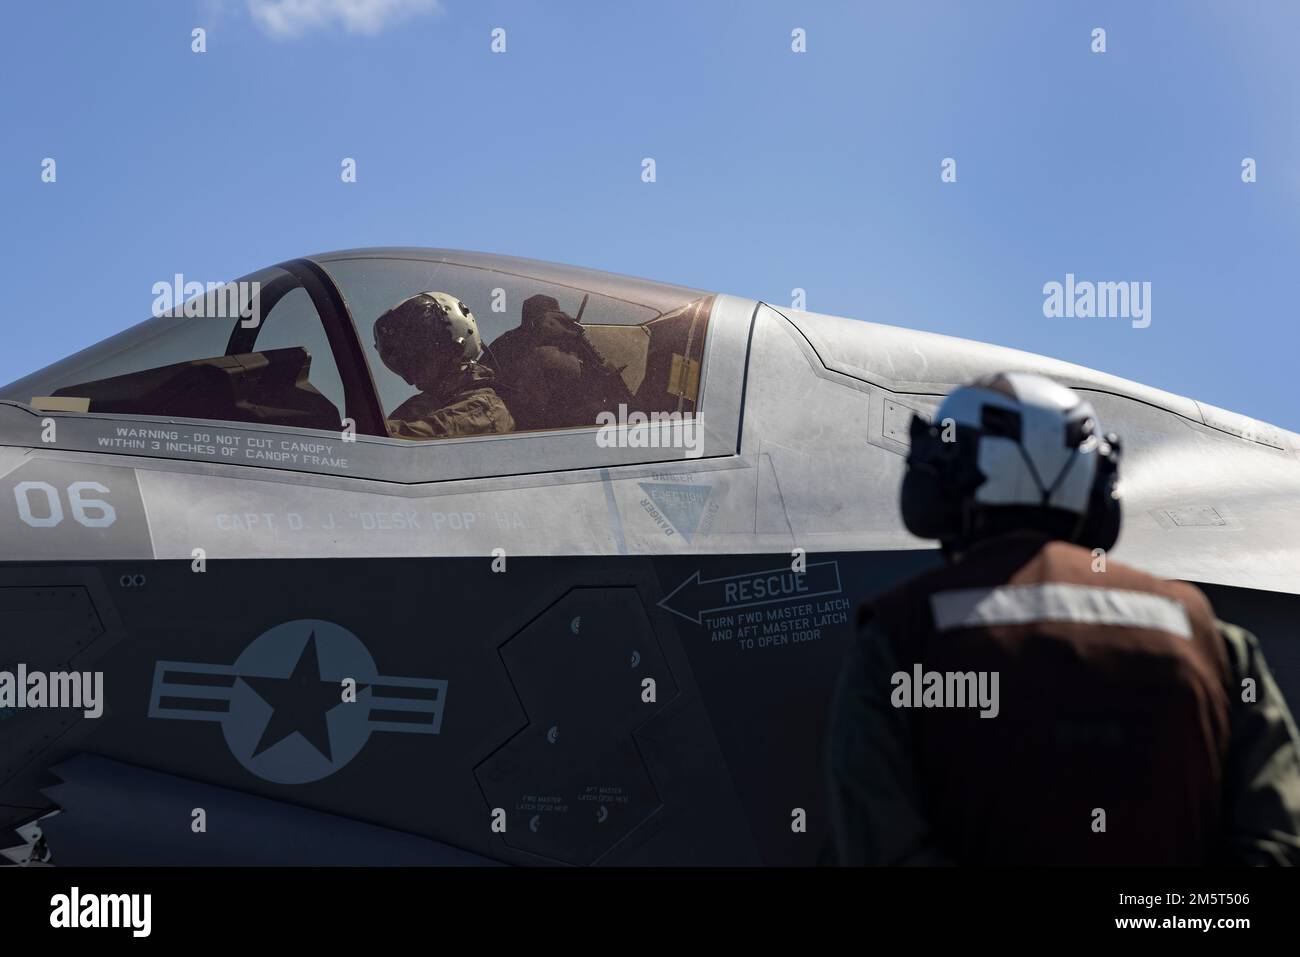 PACIFIC OCEAN (Dec. 2, 2022) - U.S. Marine Corps Capt. Jacob Rea, an F-35B Lightning II pilot assigned to Marine Fighter Attack Squadron (VMFA) 122, 13th Marine Expeditionary Unit, checks the link between the ordnance and the aircraft, Dec. 2. A force in readiness, 13th MEU aviation ordnance technicians arm our aircraft to allow pilots to rapidly respond to threats in all domain environments through naval power projection. The 13th Marine Expeditionary Unit is embarked on the Makin Island Amphibious Ready Group, comprised of amphibious assault ship USS Makin Island (LHD 8) and amphibious trans Stock Photo